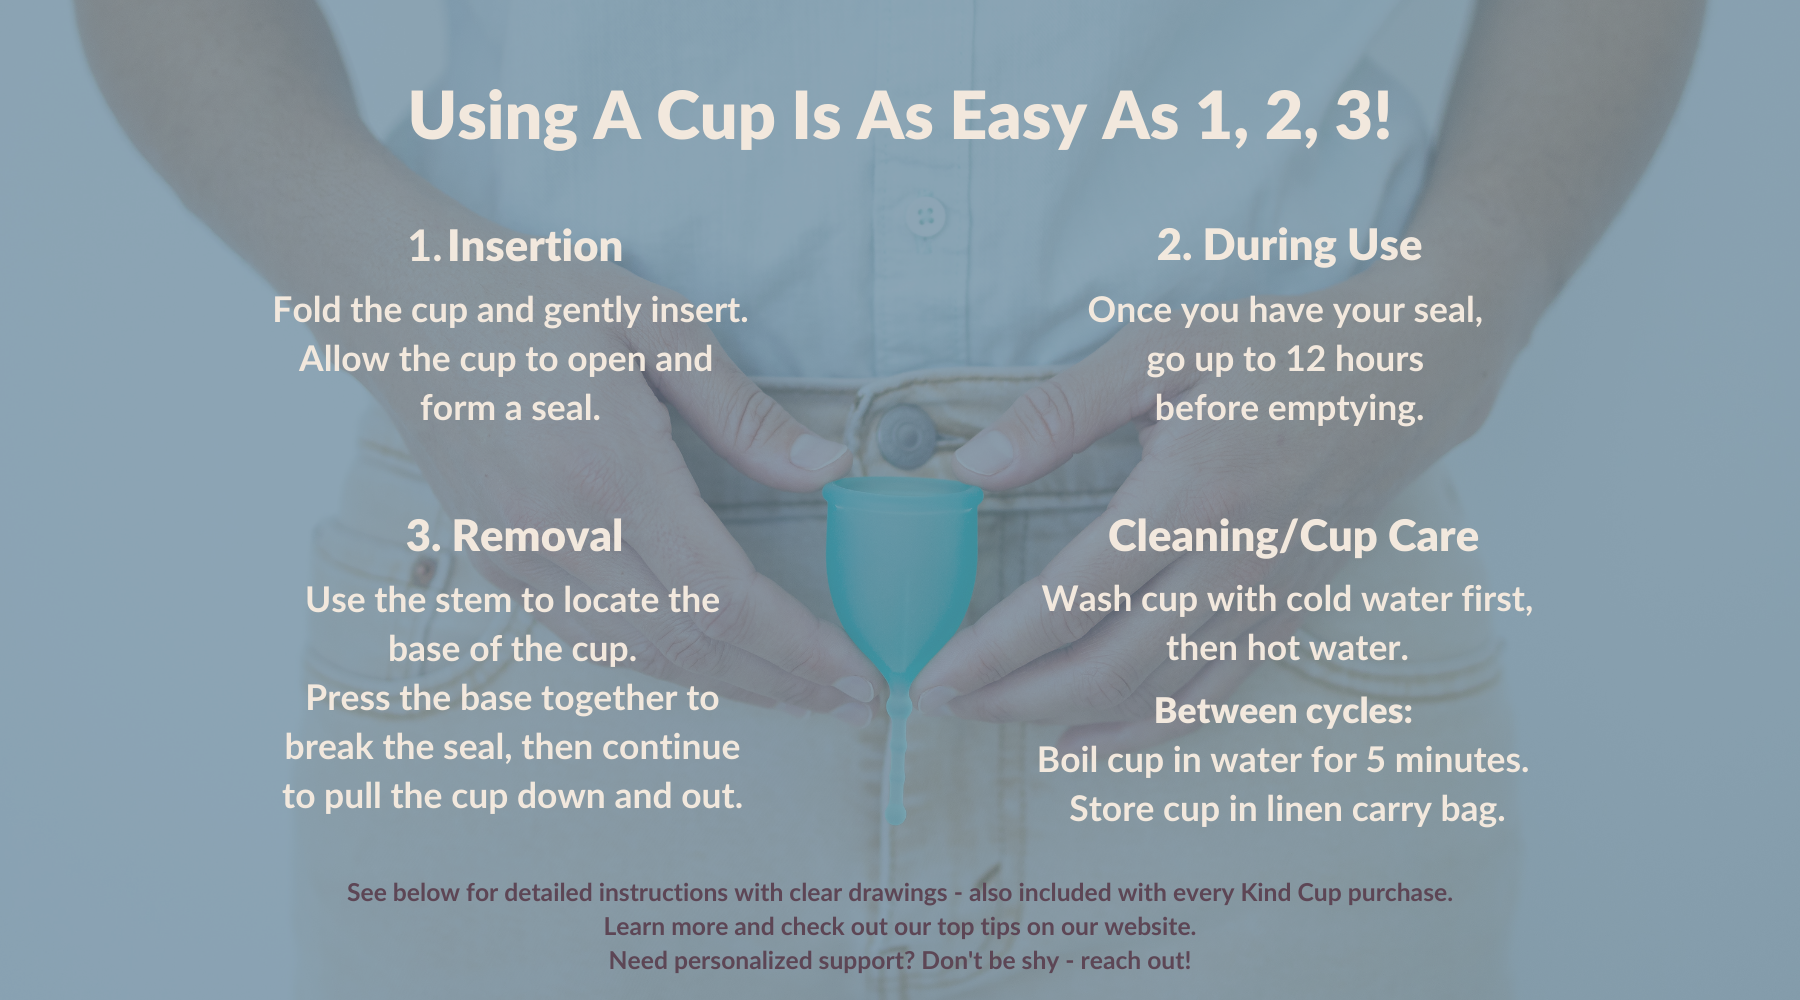 Using a Cup is as Easy as 1, 2, 3! Insertion, During Use, Removal, Cleaning/Cup Care for Kind Cup menstrual cup.